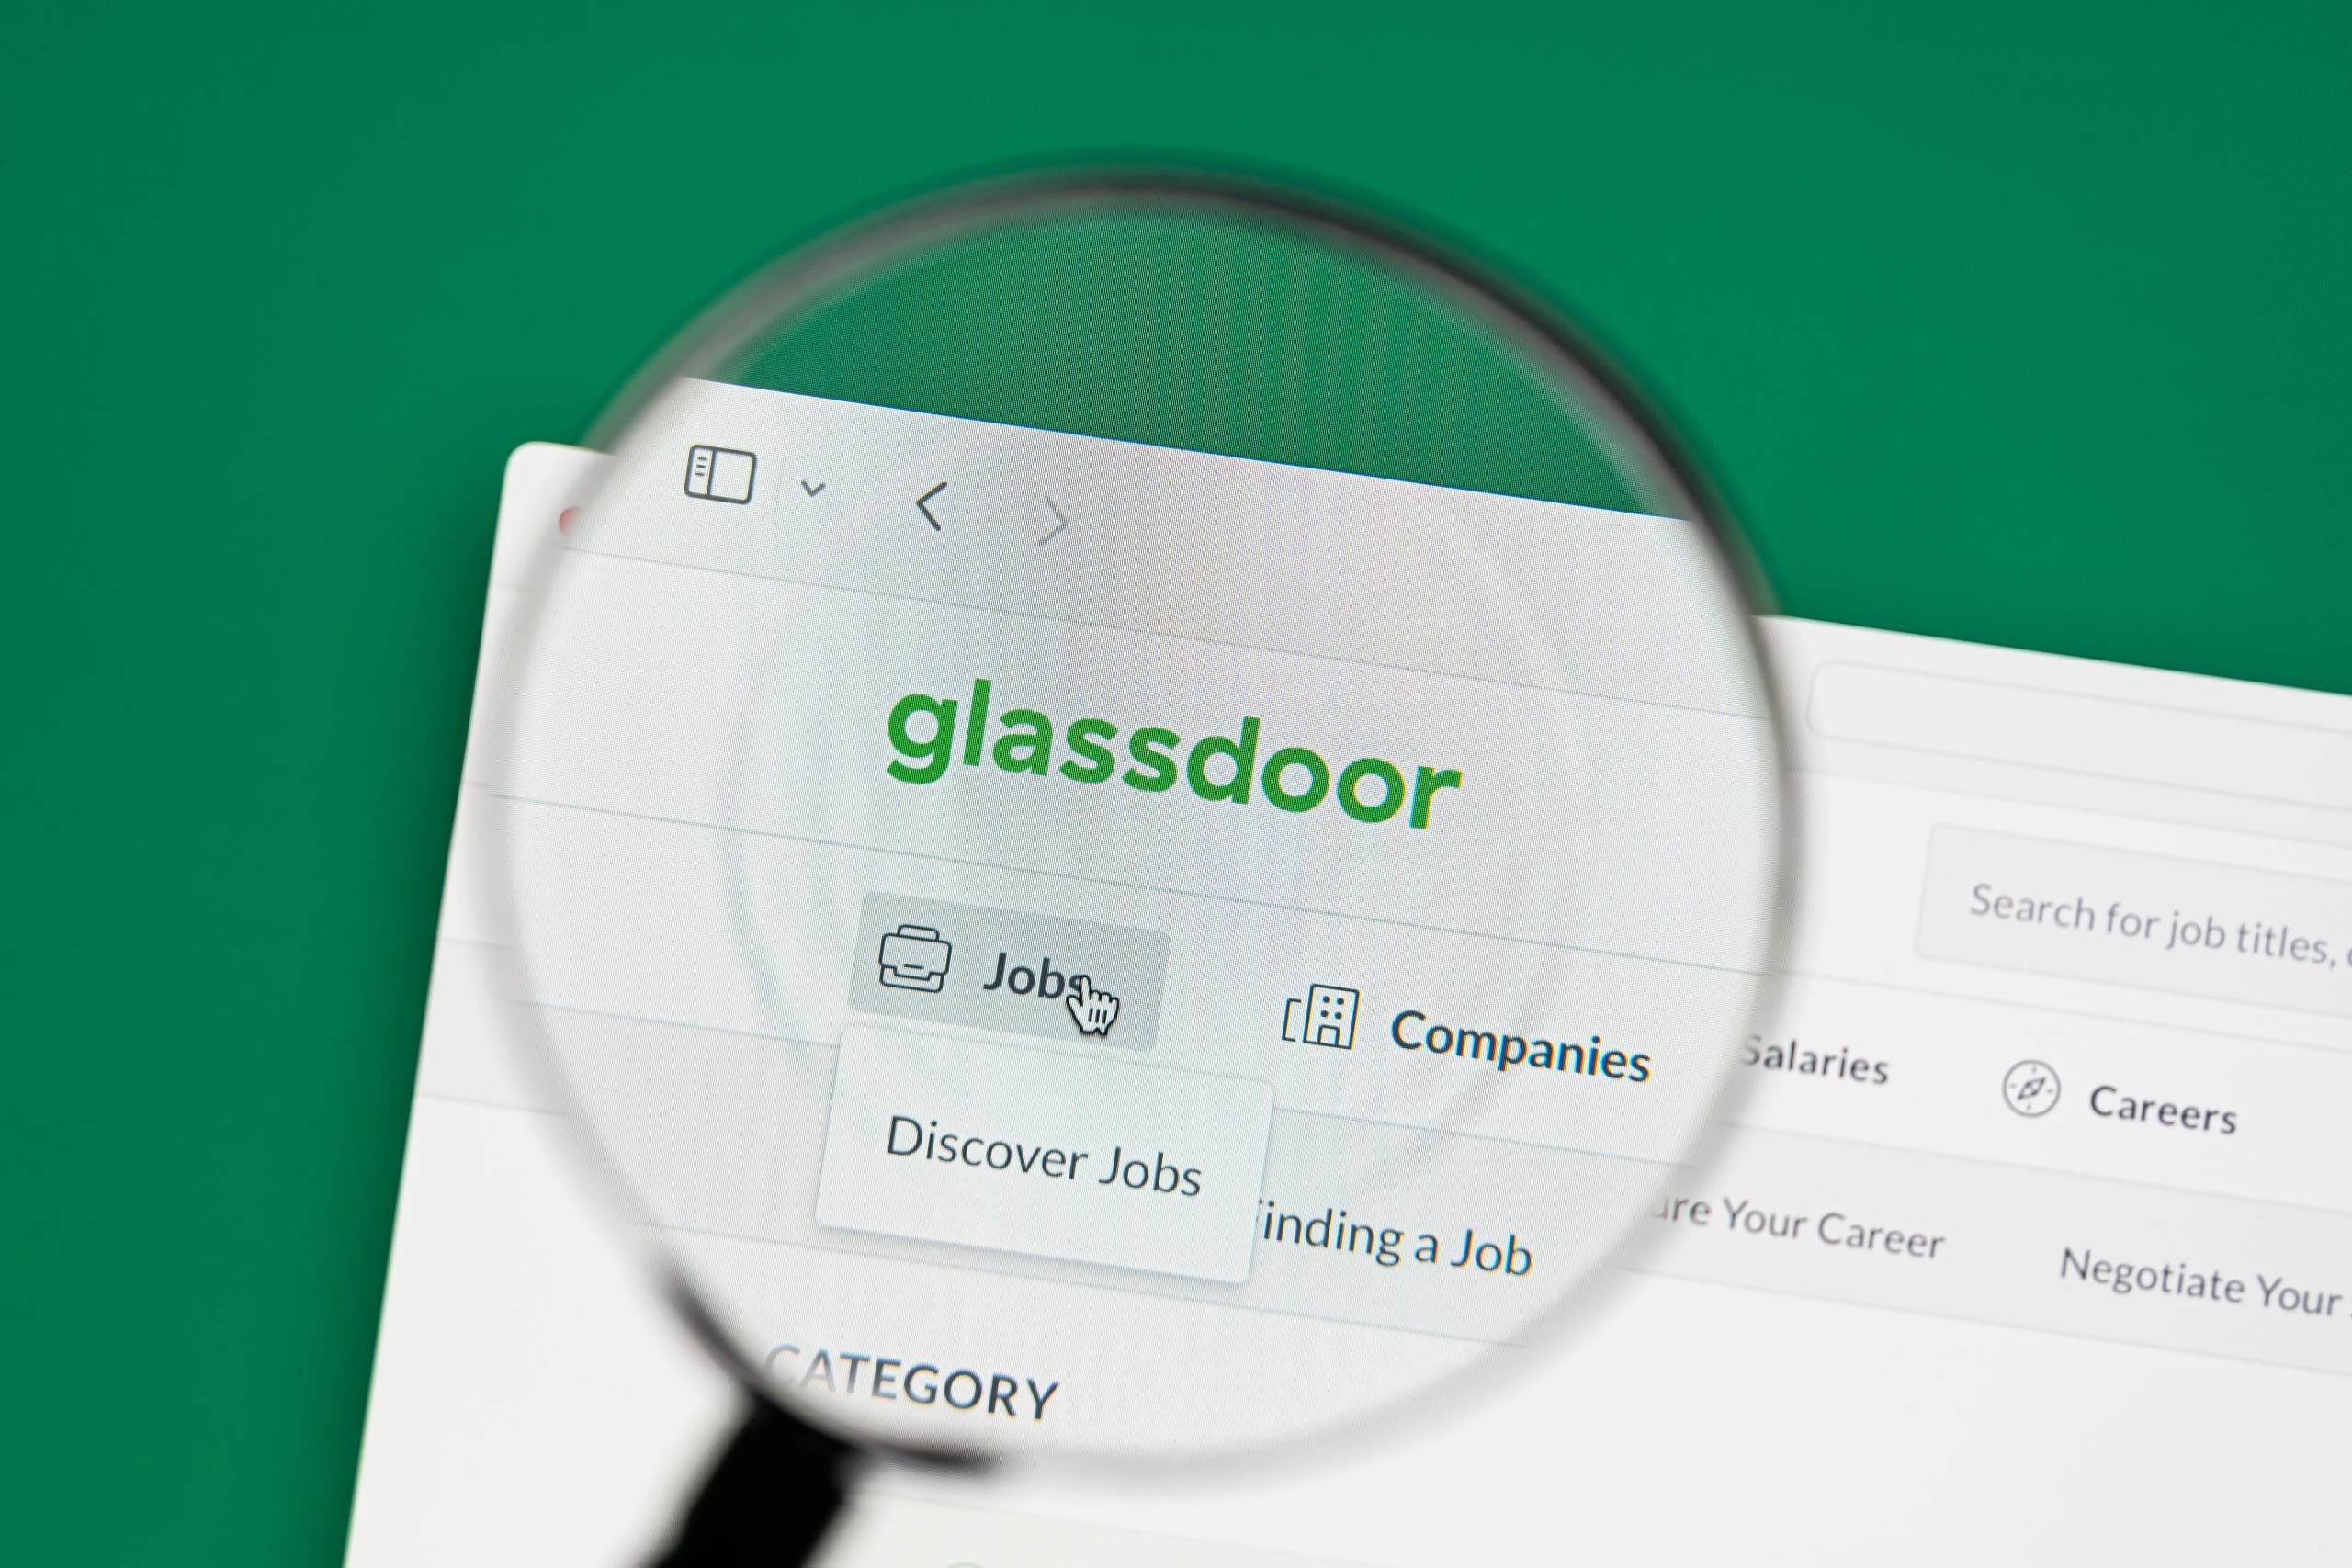 Glassdoor on a computer screen with a magnifying glass.